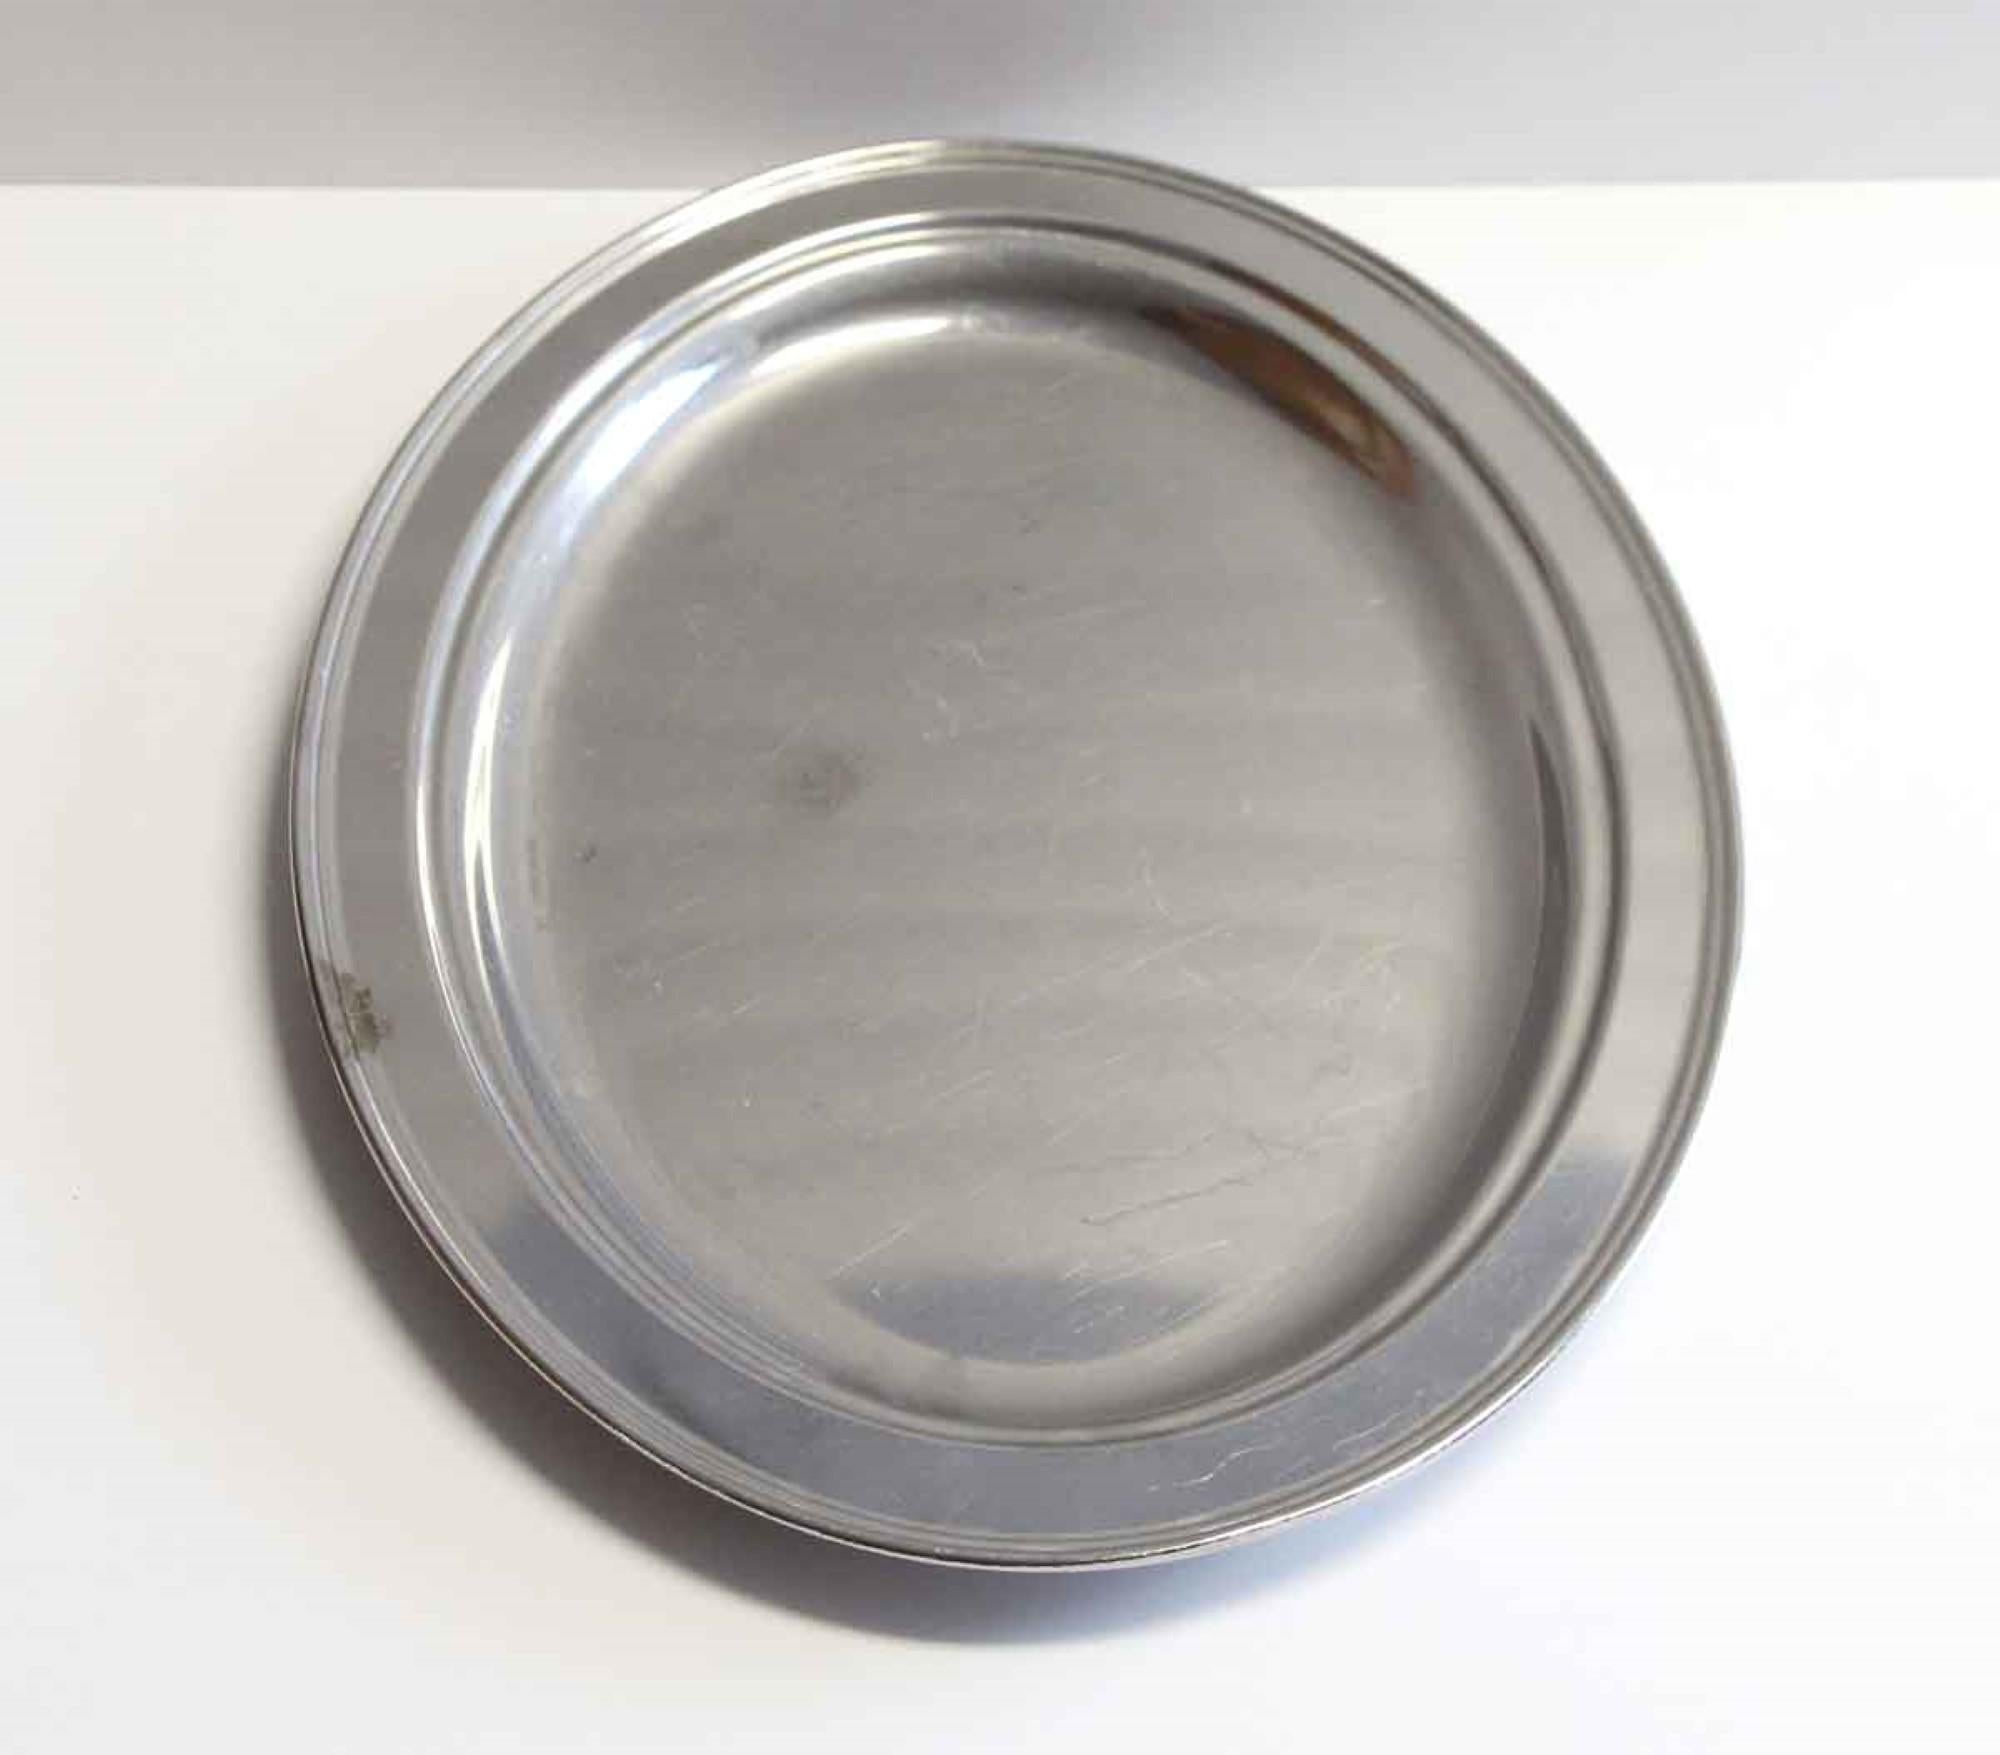 1990s stainless steel oval serving tray. From the NYC Waldorf Astoria Hotel Towers. Waldorf Astoria authenticity card included with your purchase. Small quantity available at time of posting. Please inquire. Priced each. This can be seen at our 400